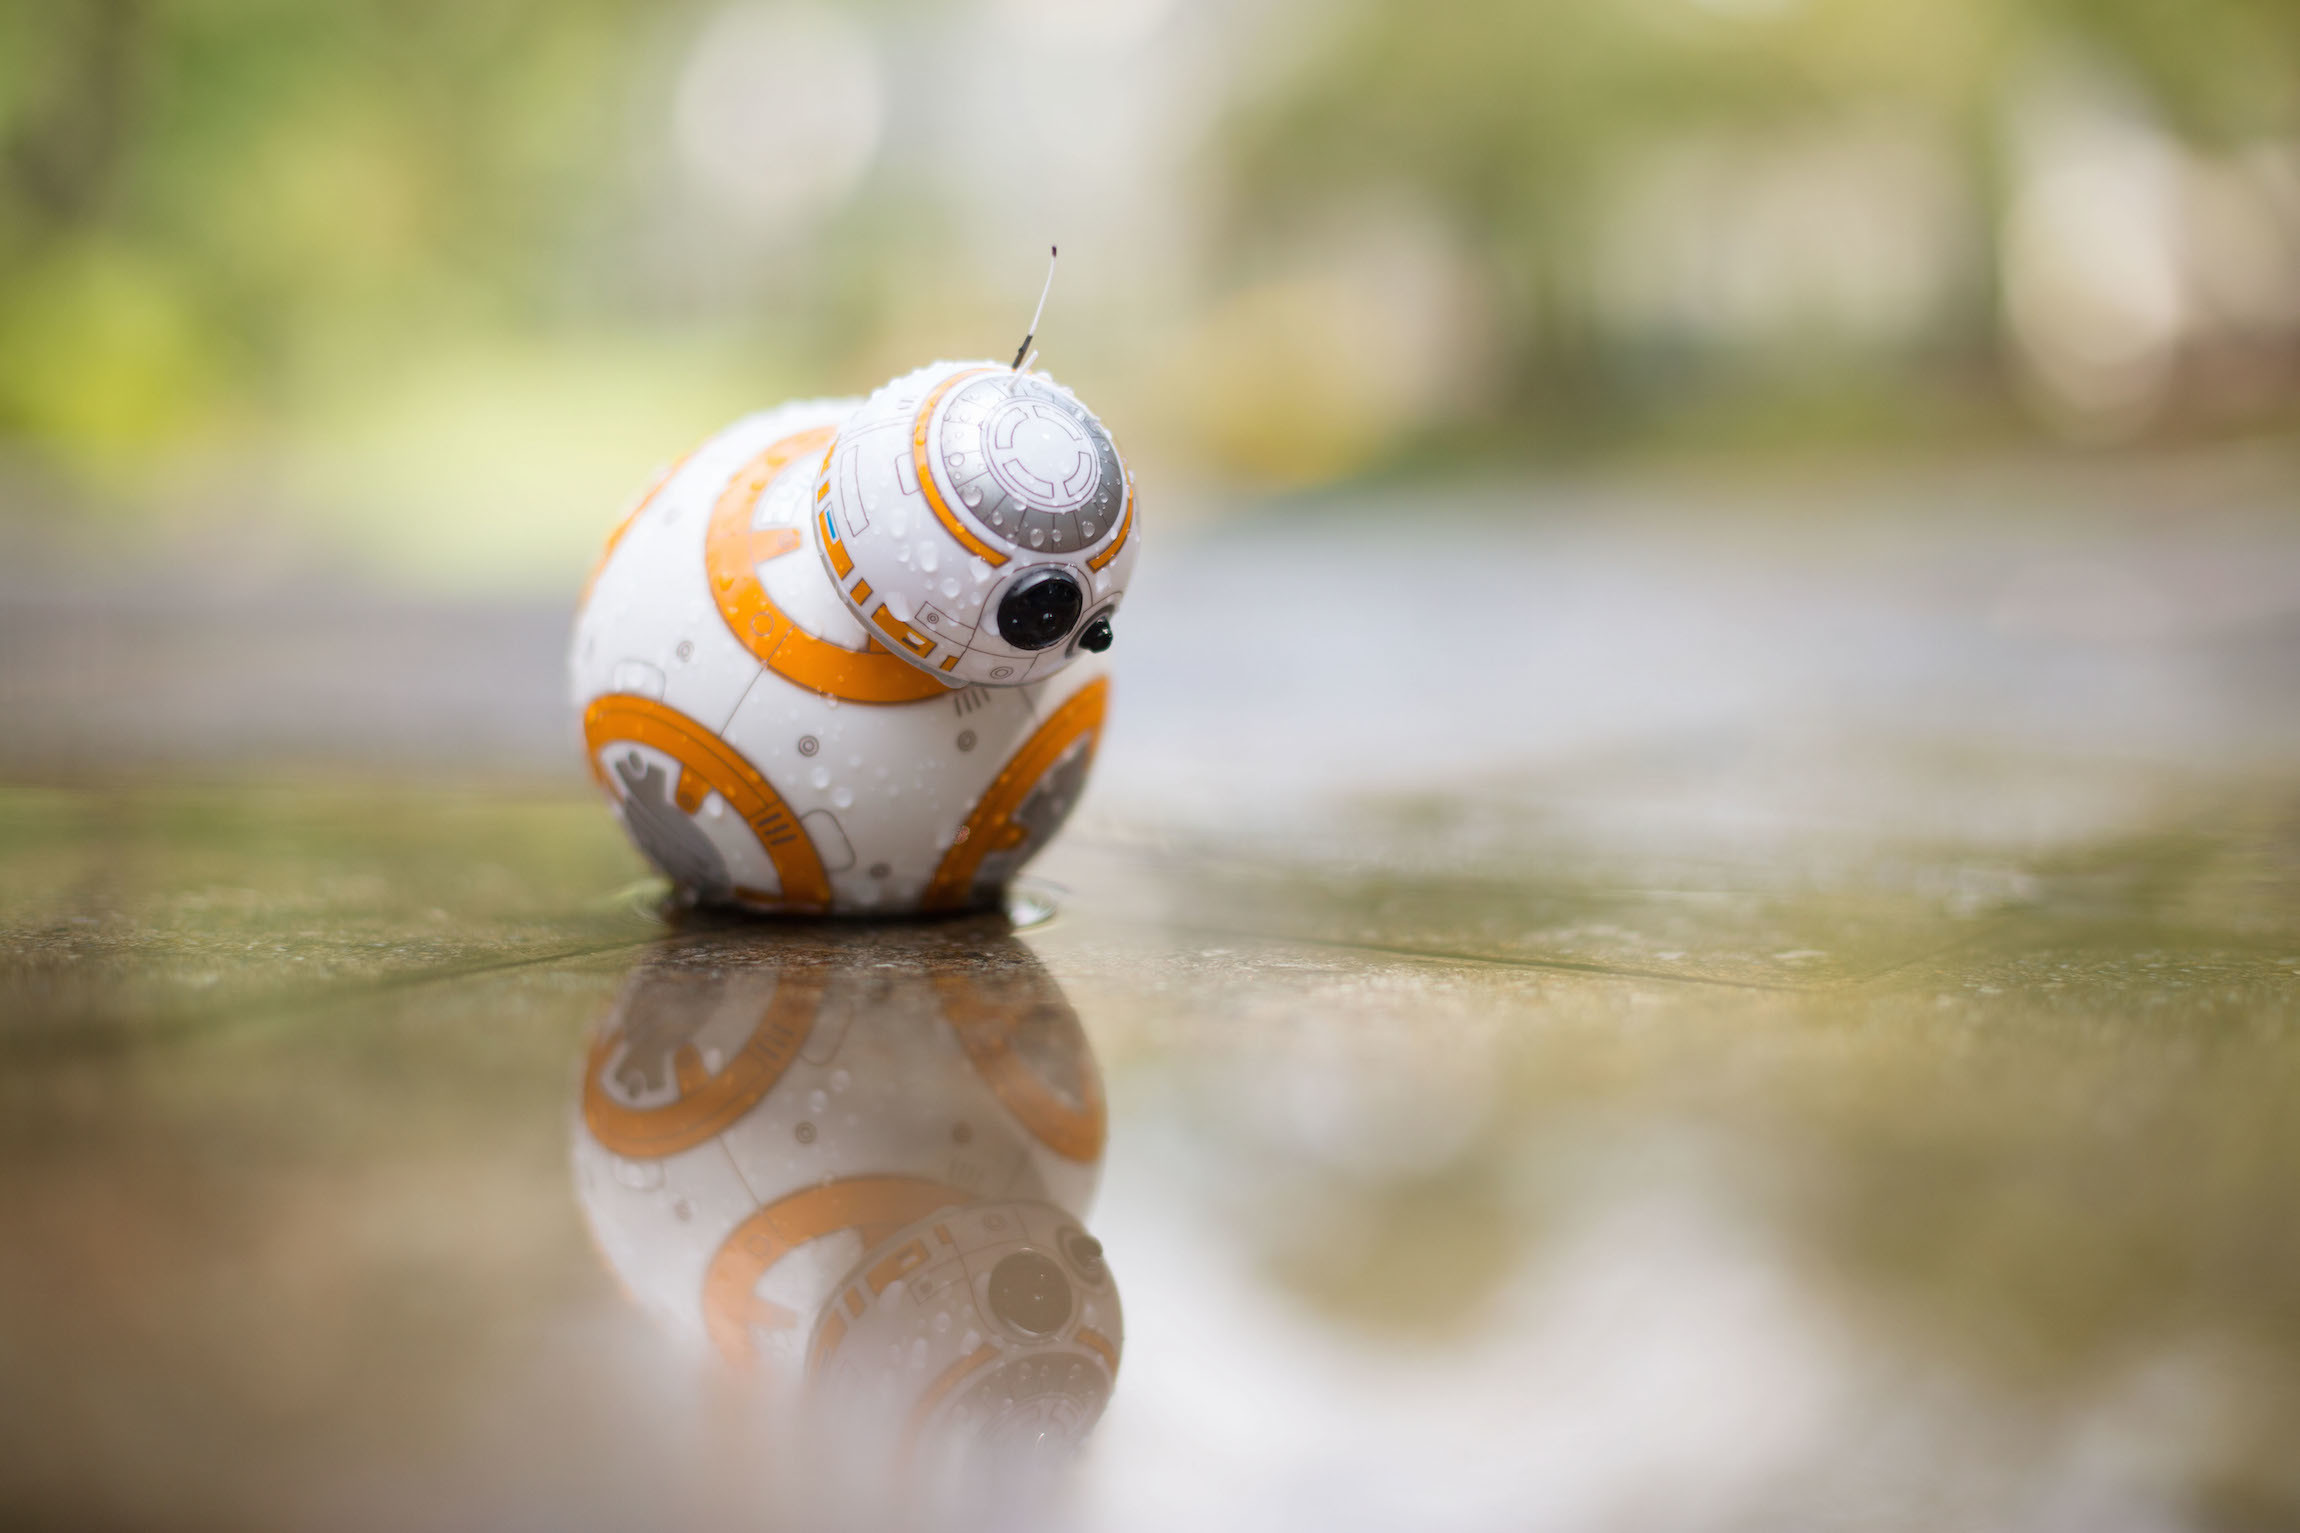 Explore Bb8 Star Wars, Star Wars Gifts, and more